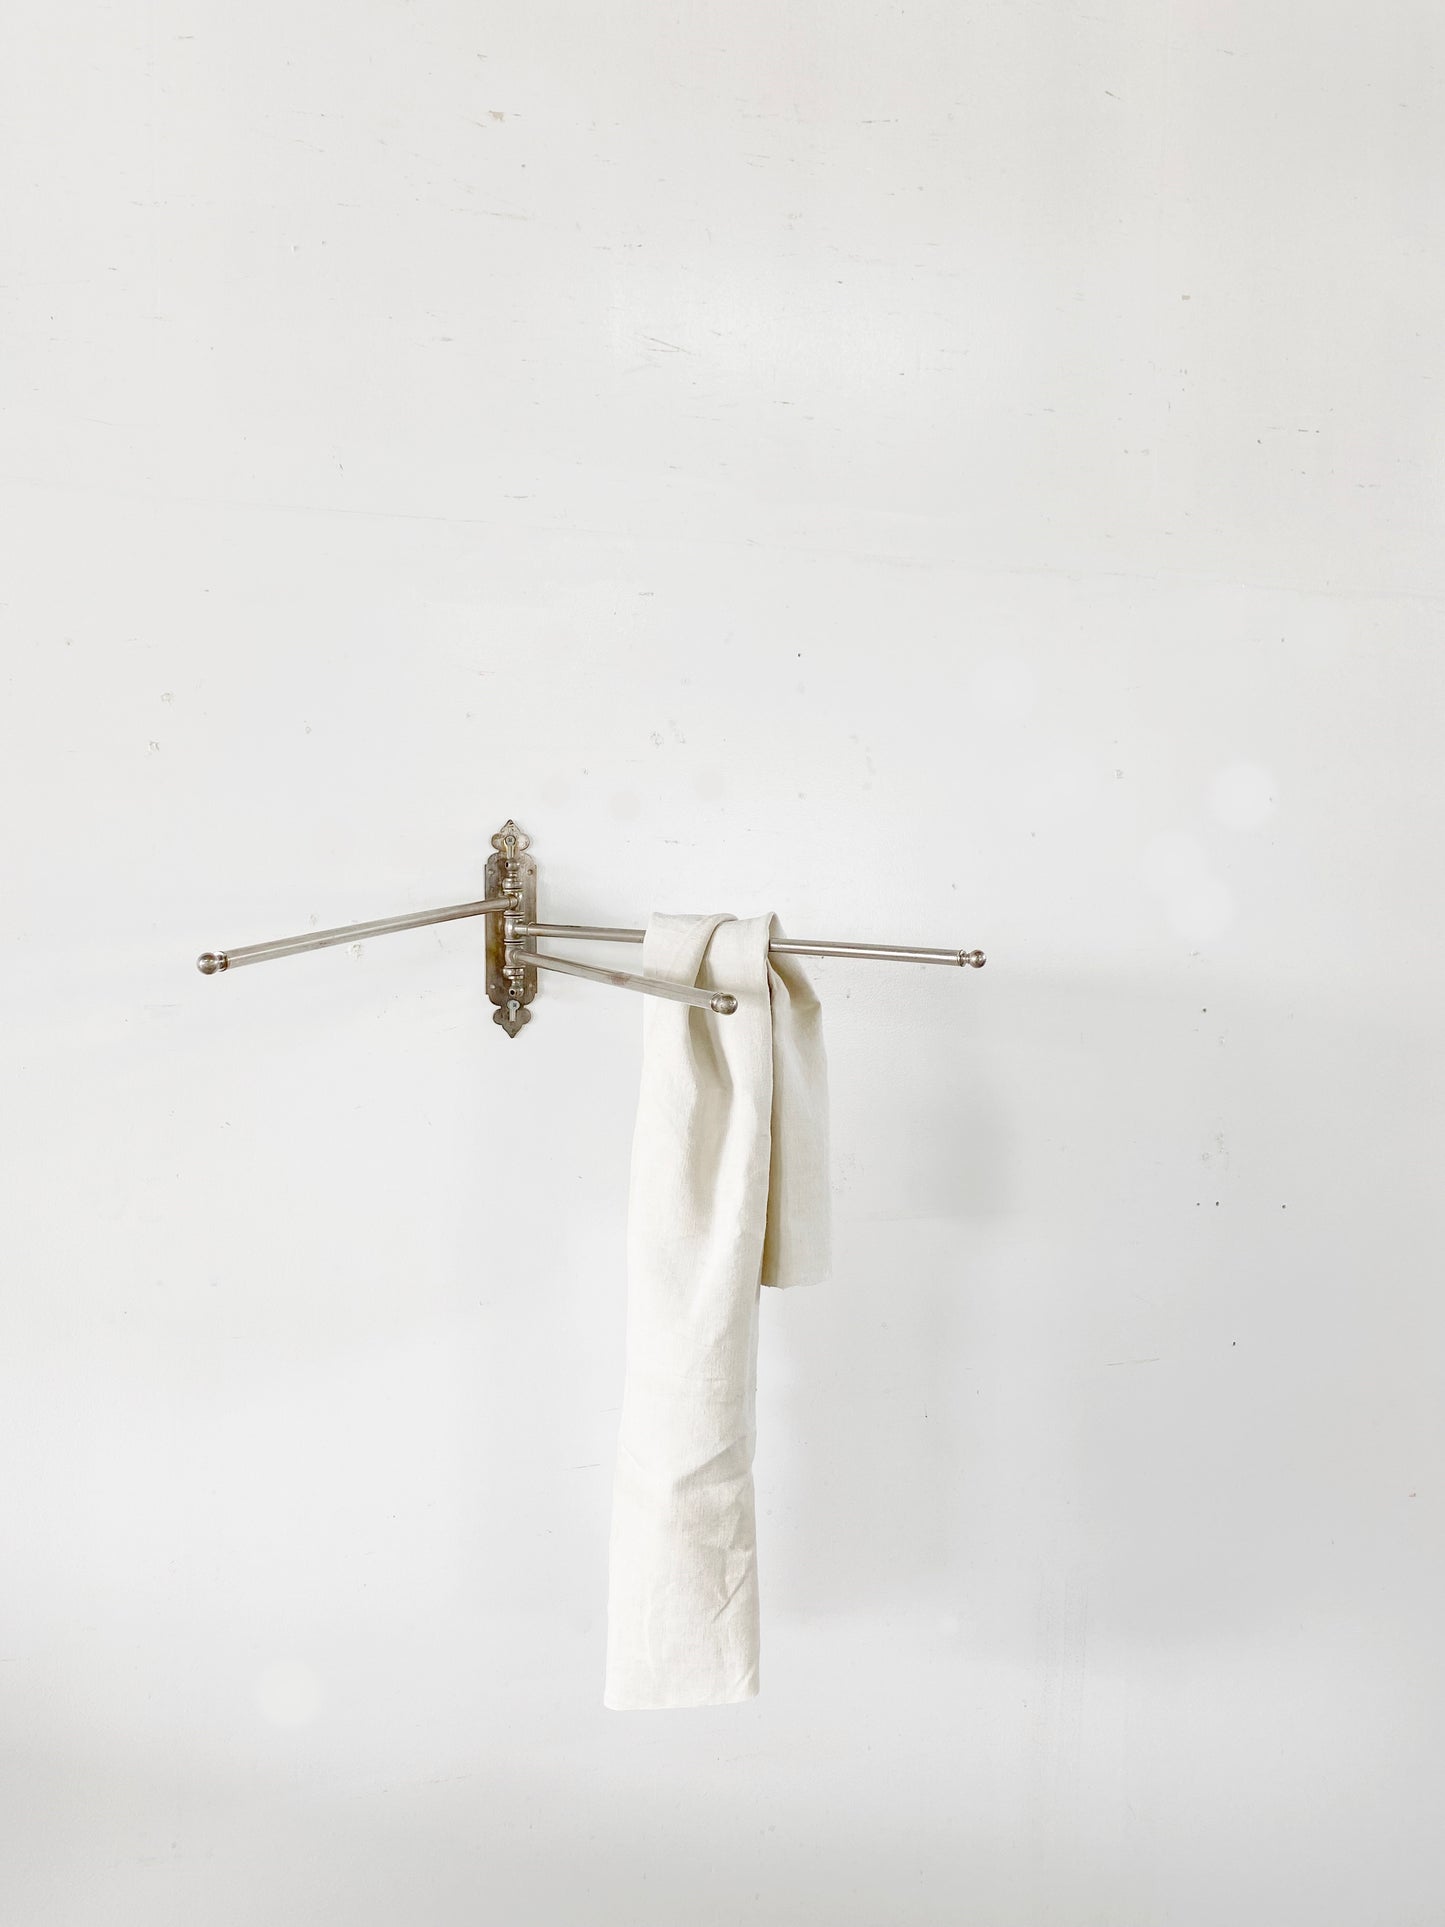 French Towel Hanger